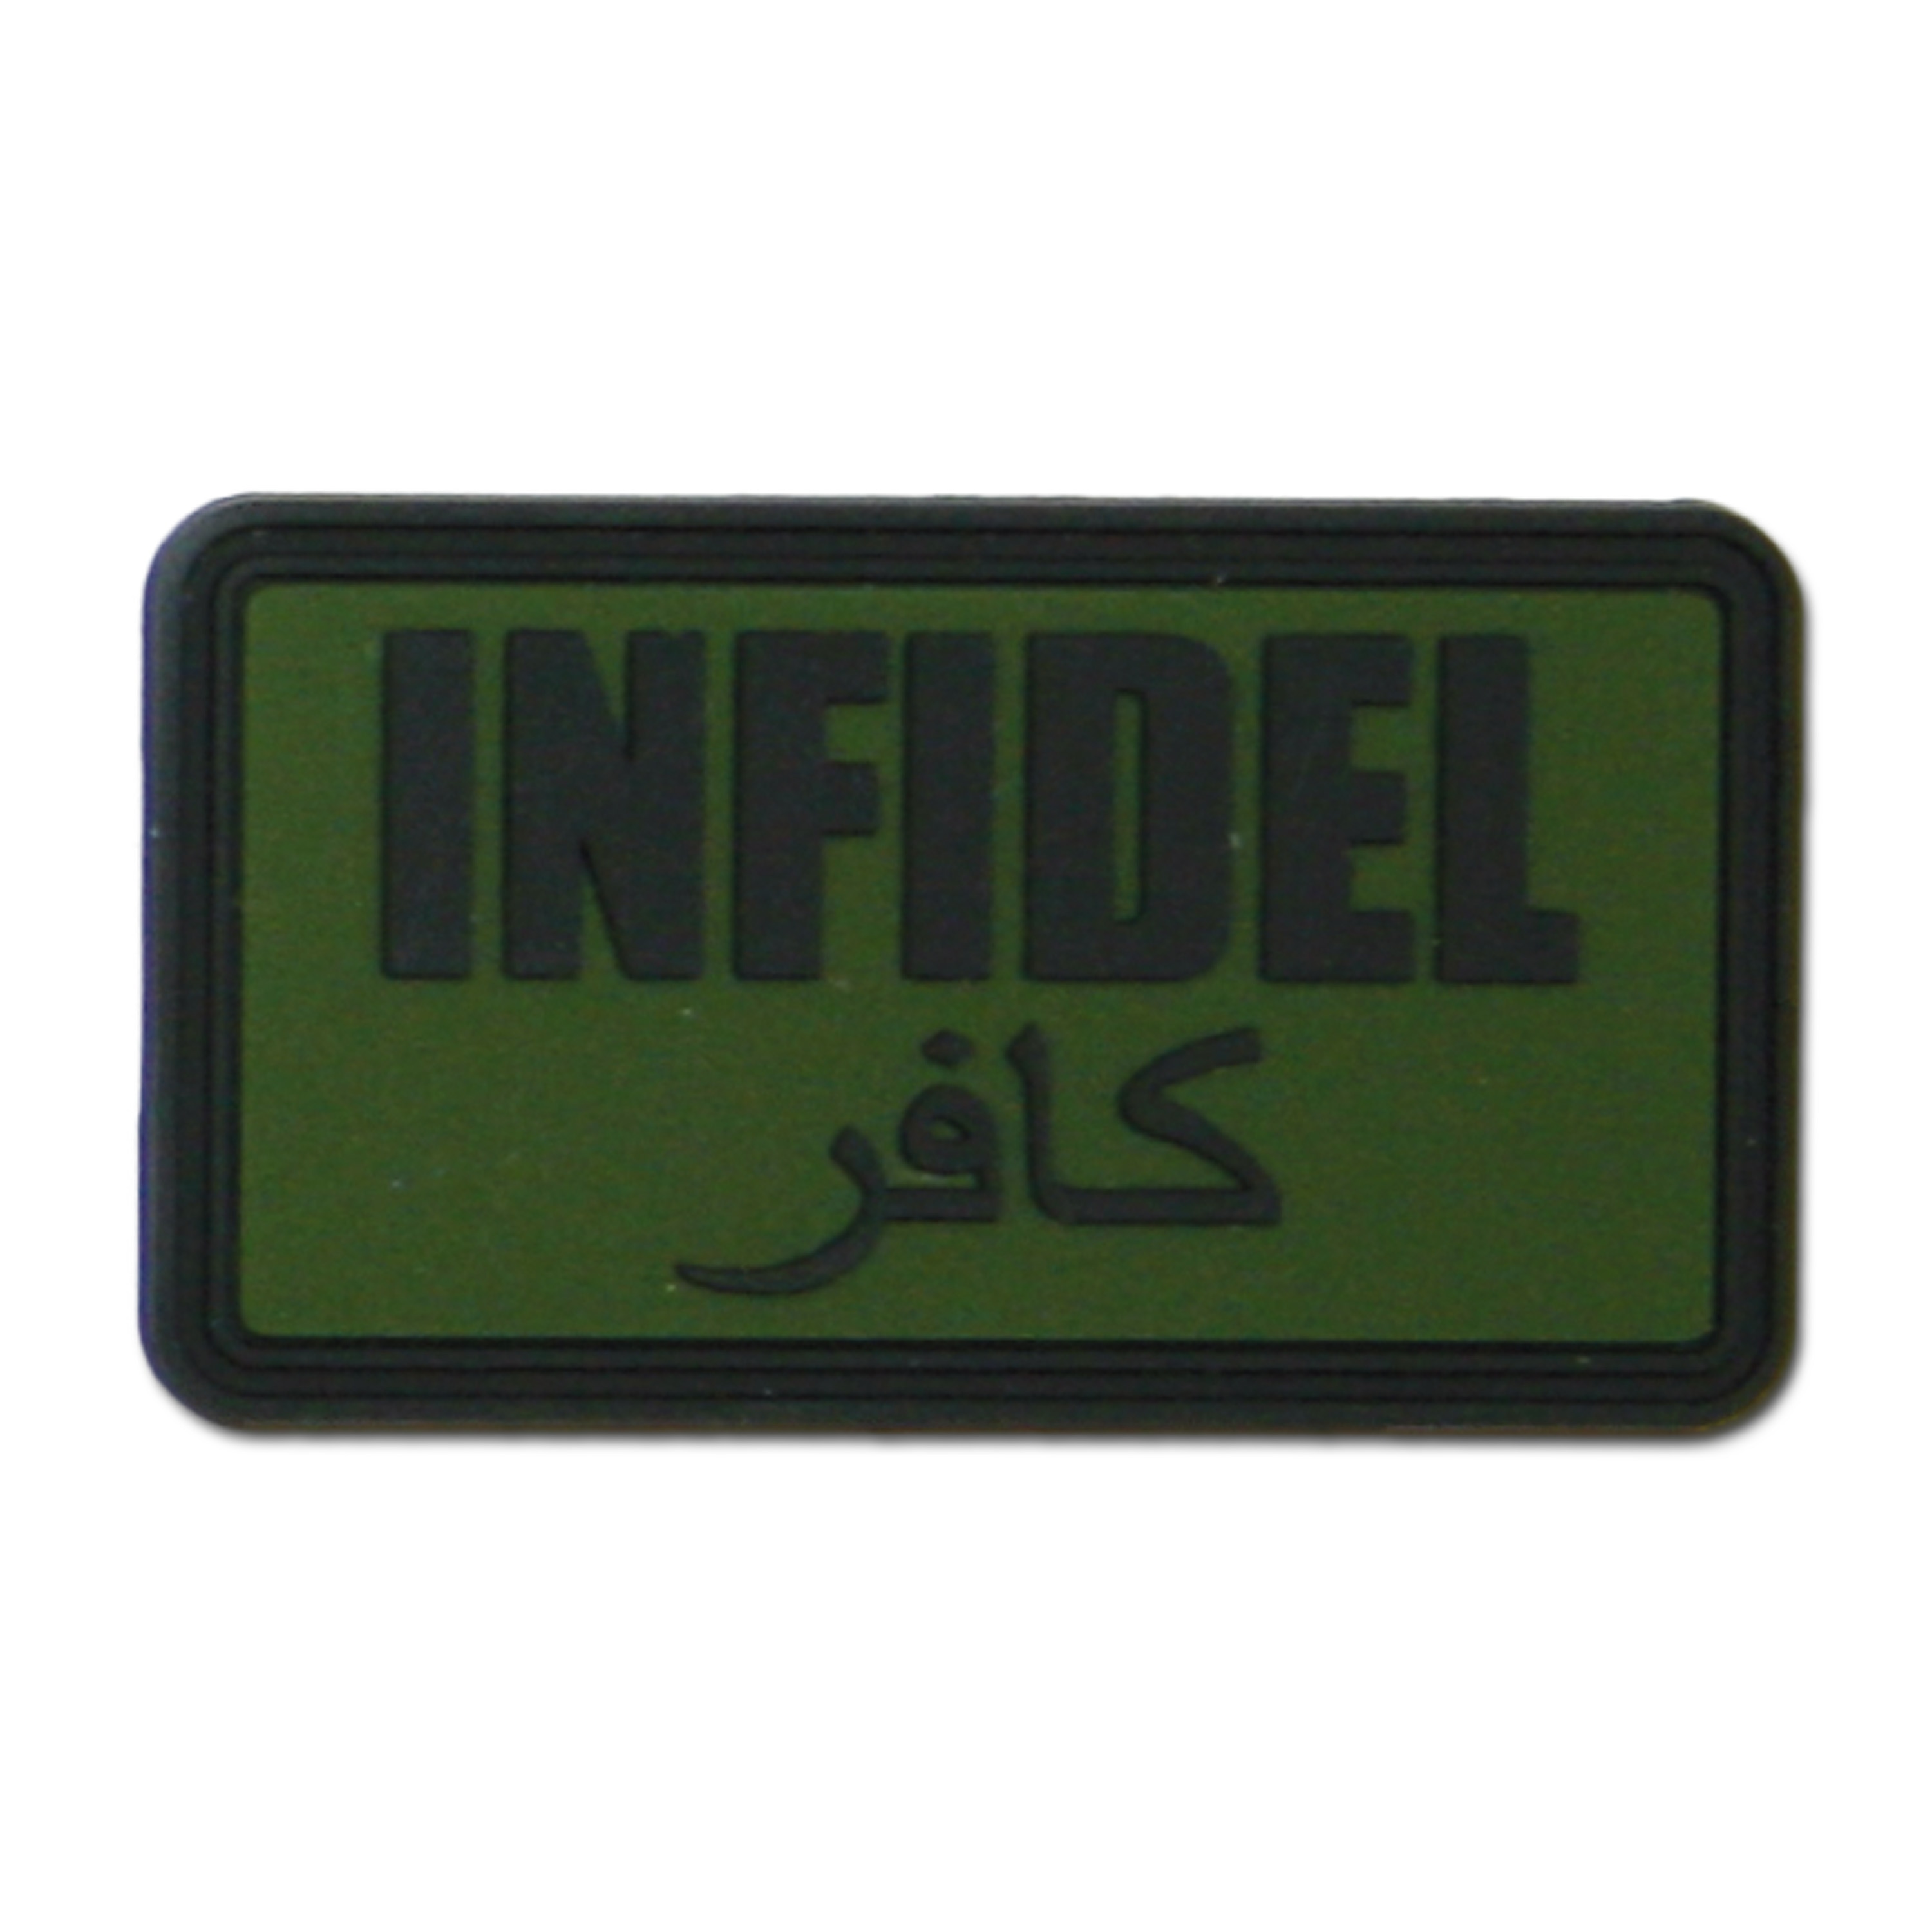 3D-Patch Infidel forest 